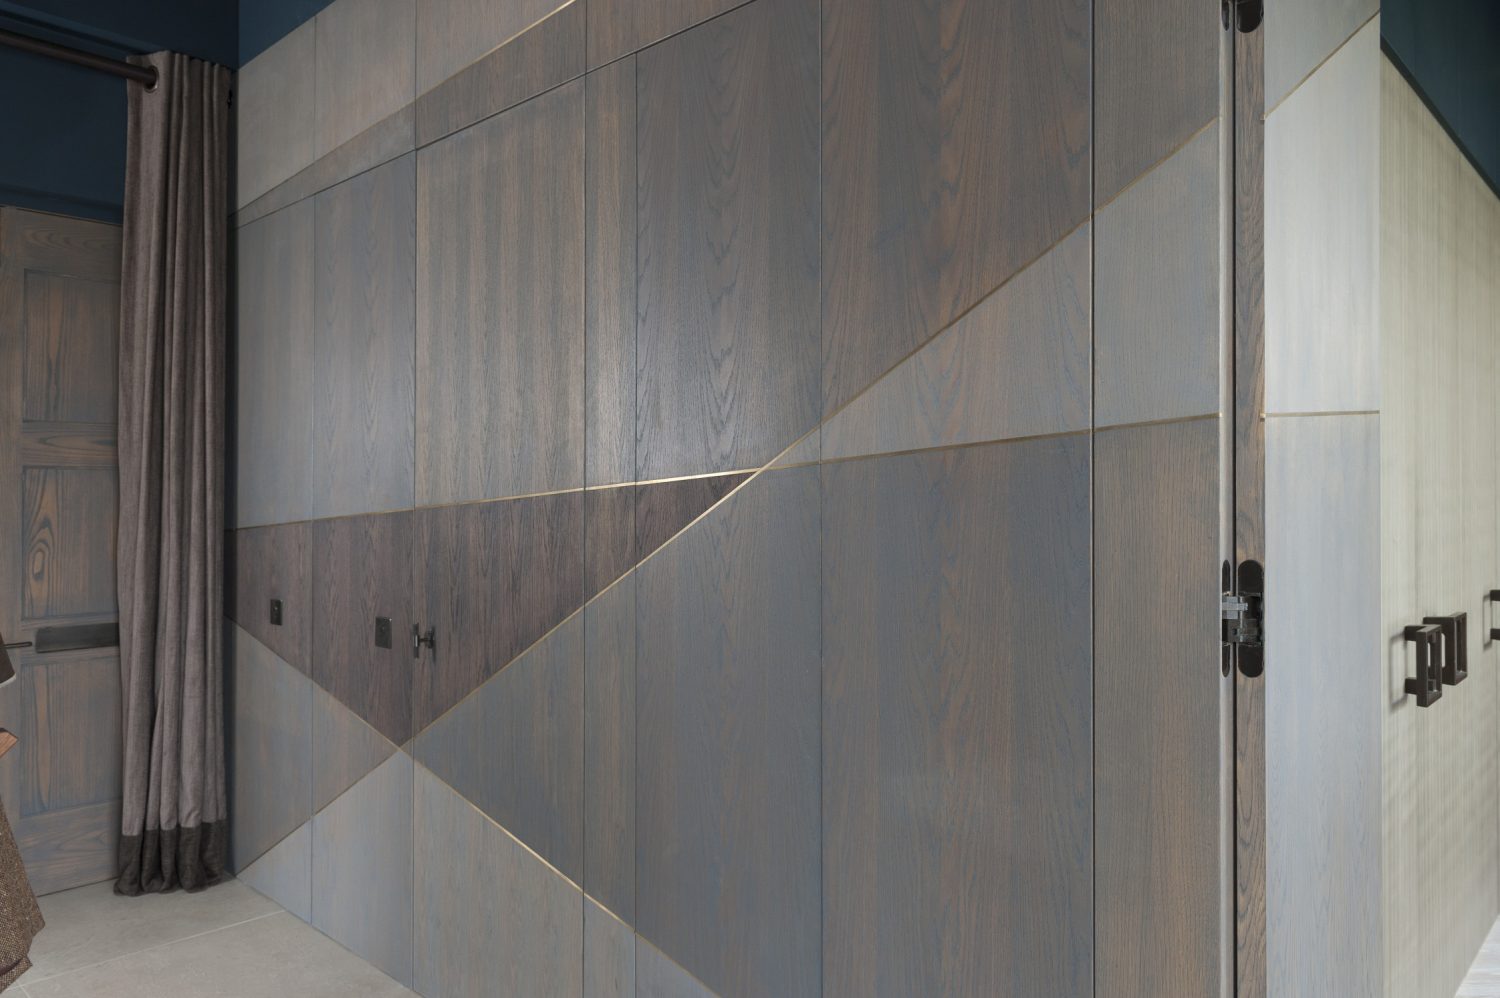 The linear brass inlays are picked up as a theme on the walls too, which are also made from grey stained oak. The golden lines serve to unite and streamline the space, running across the ‘hidden’ doors to the bedroom, bathrooms and a storage area